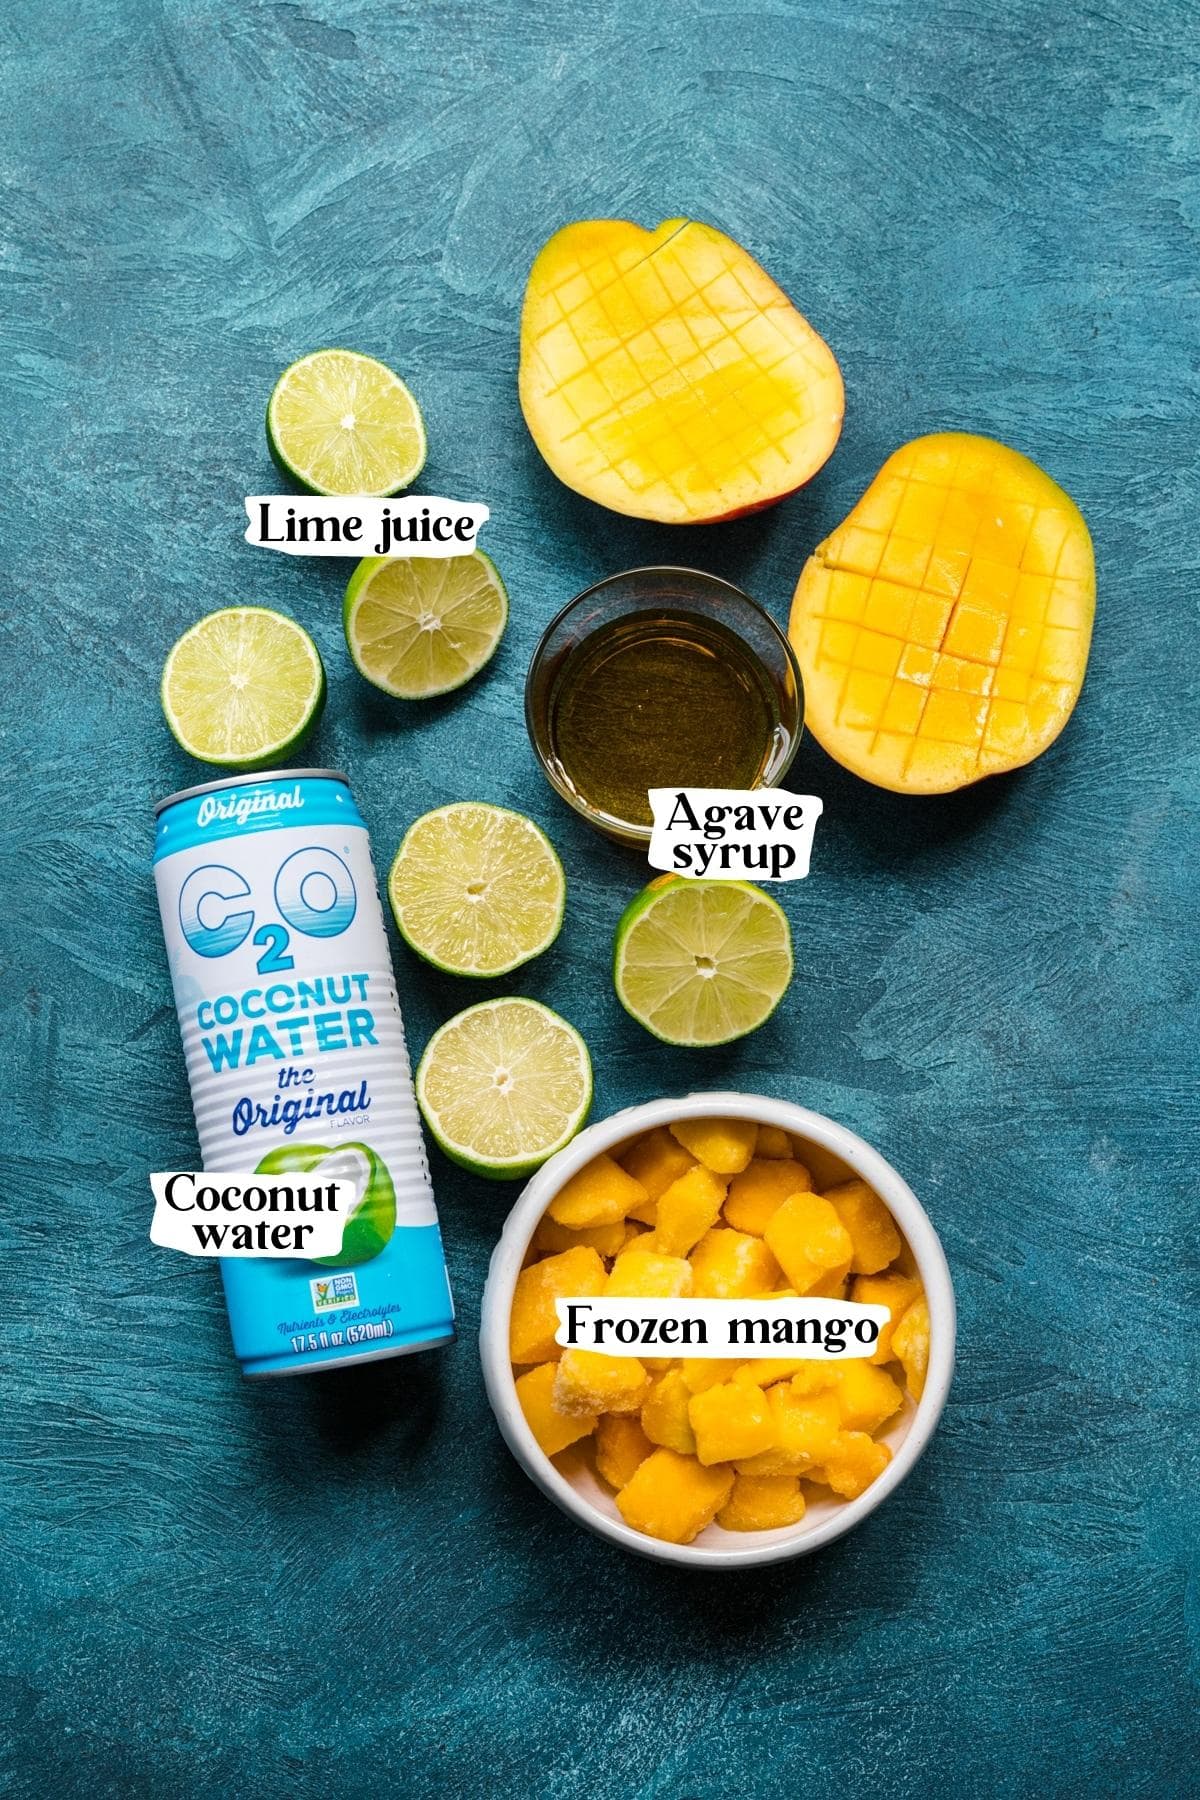 Overhead view of mango popsicle ingredients, including lime juice, frozen mango, agave syrup, and coconut water.